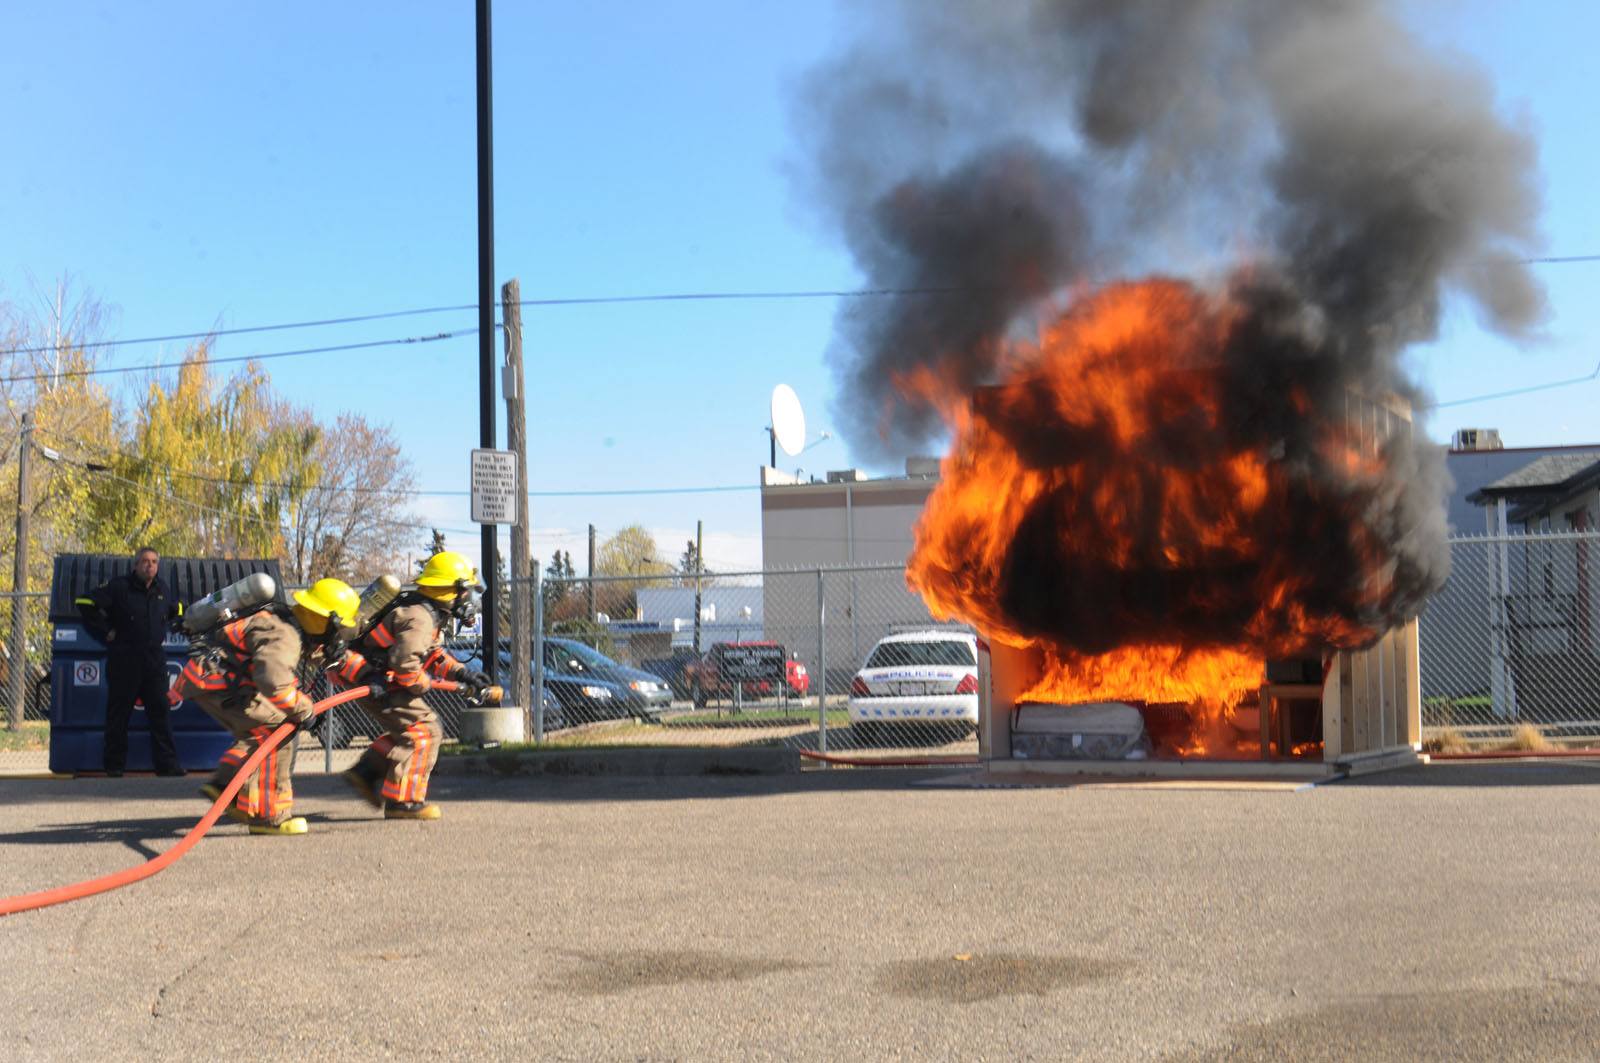 To kick off Fire Prevention Week in Red Deer